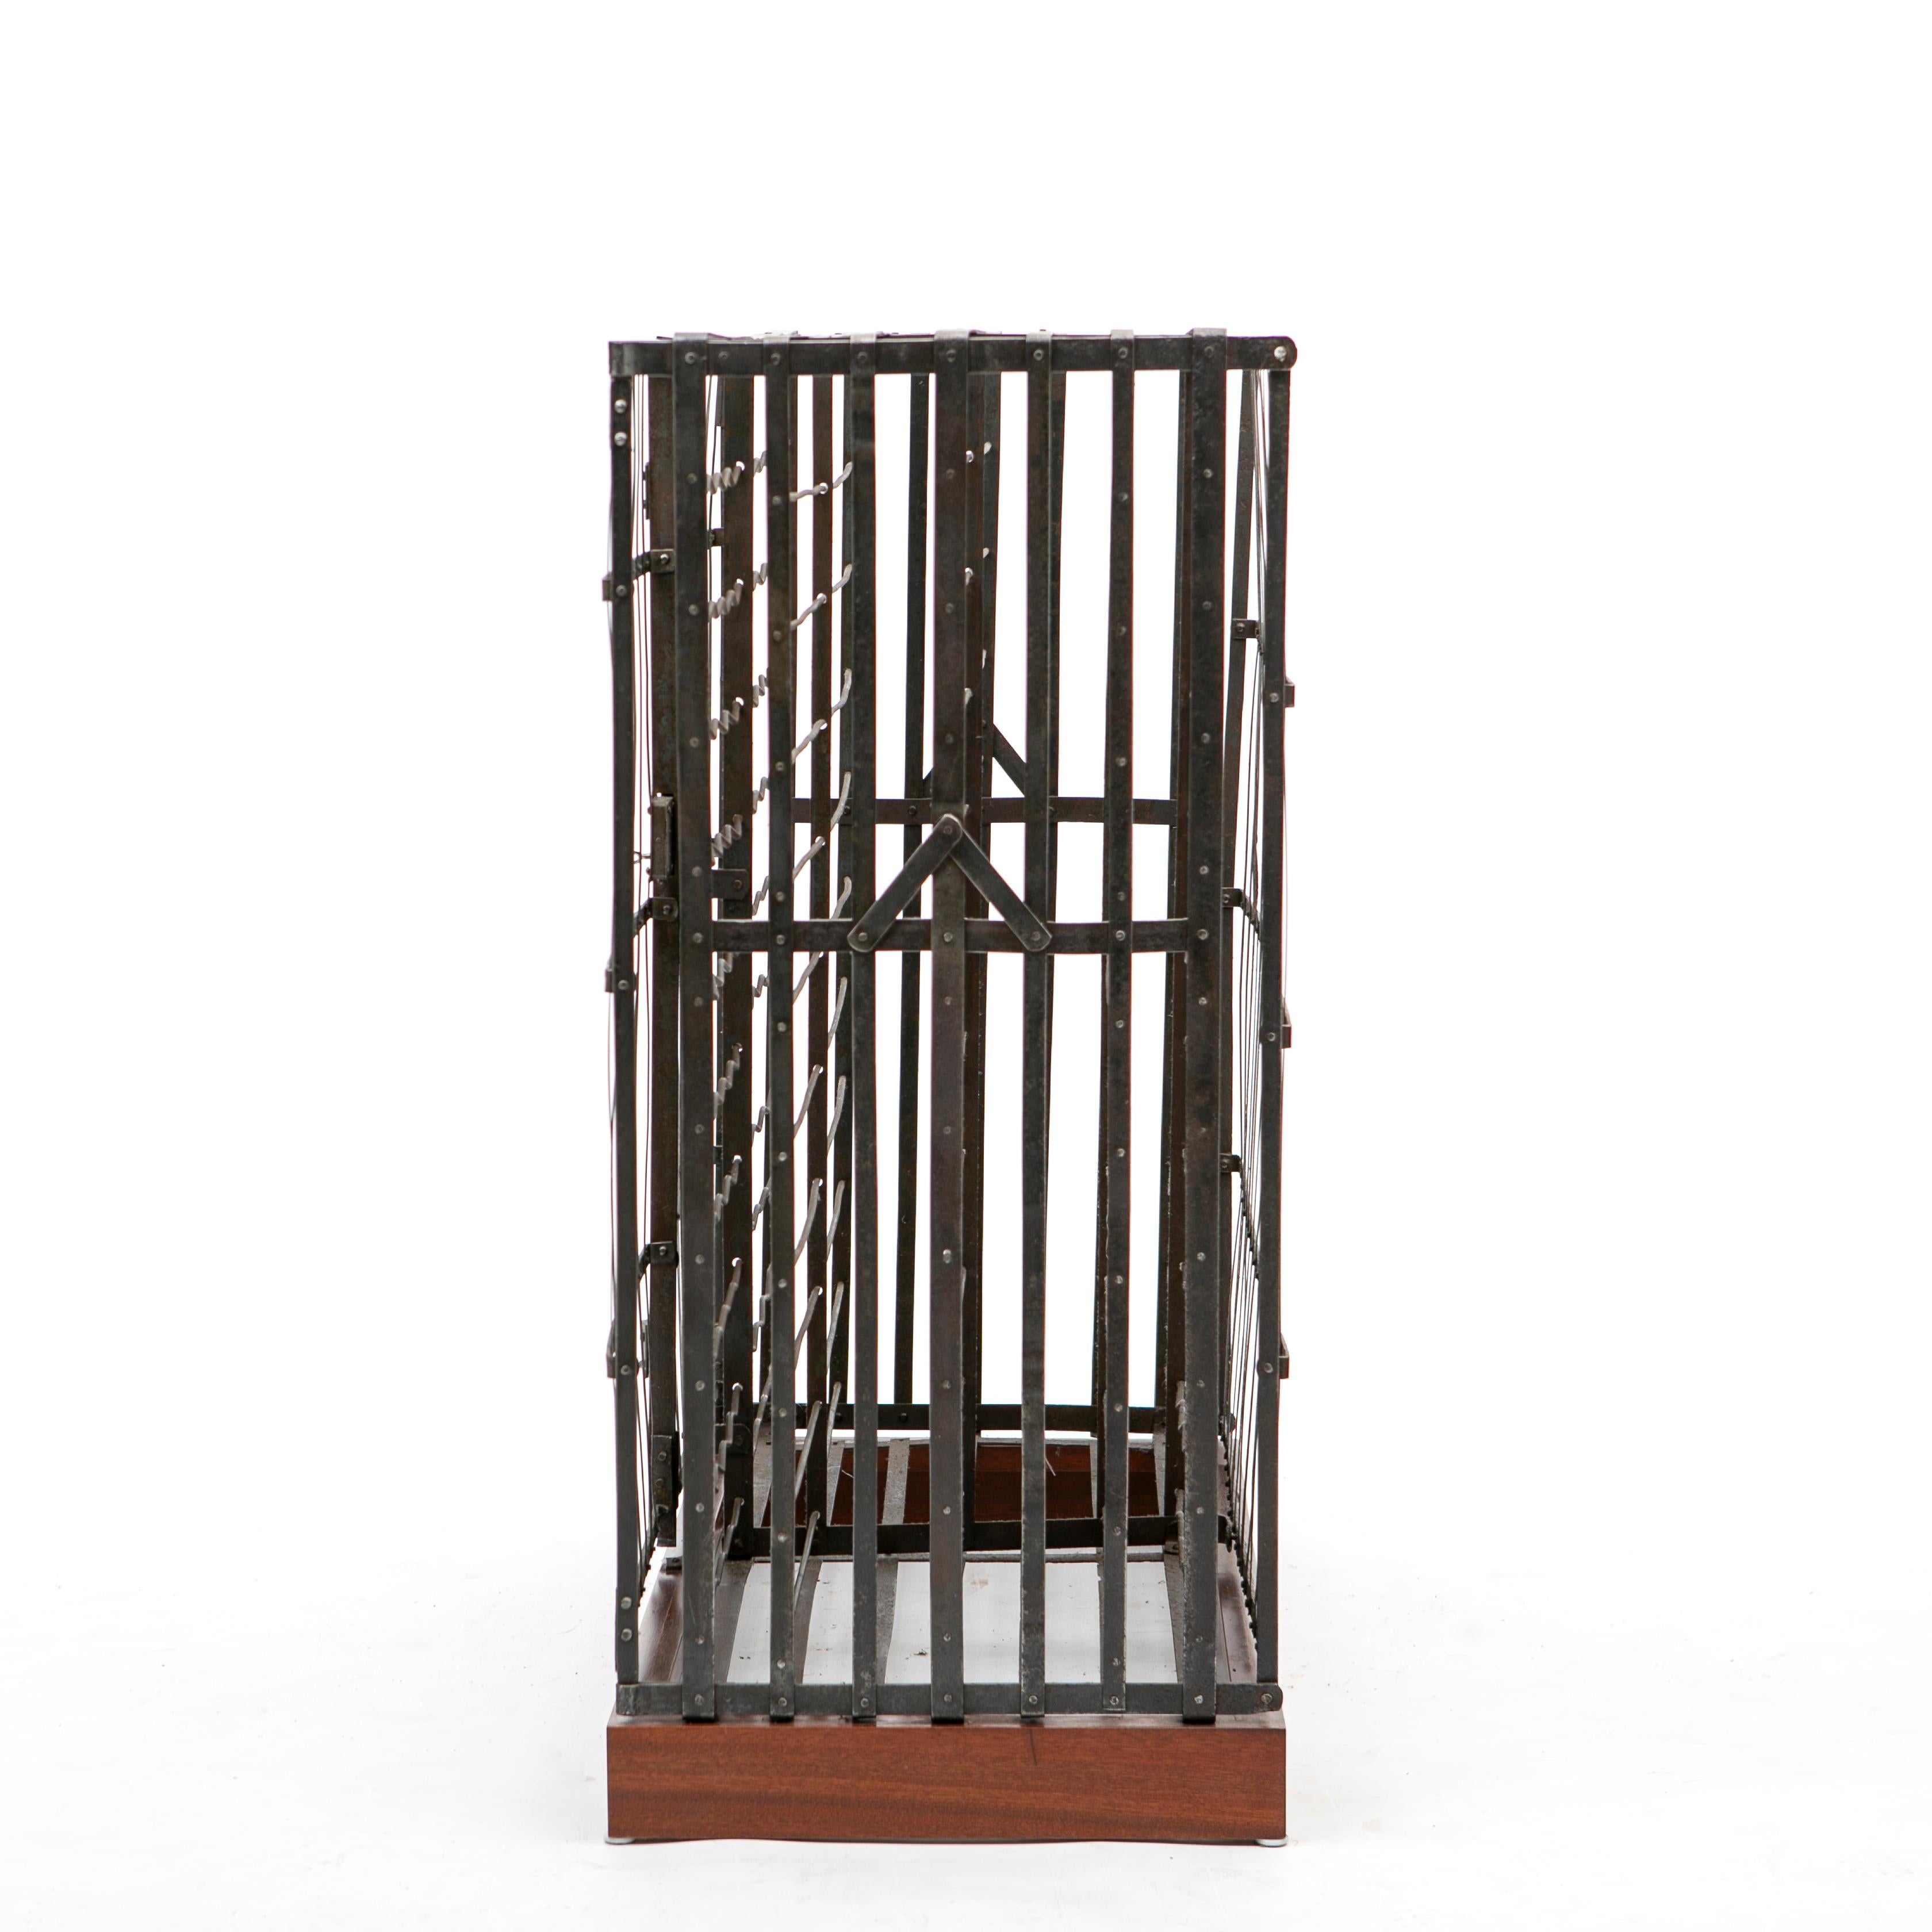 Antique French Iron Wine Cellar Rack Cage In Good Condition For Sale In Kastrup, DK